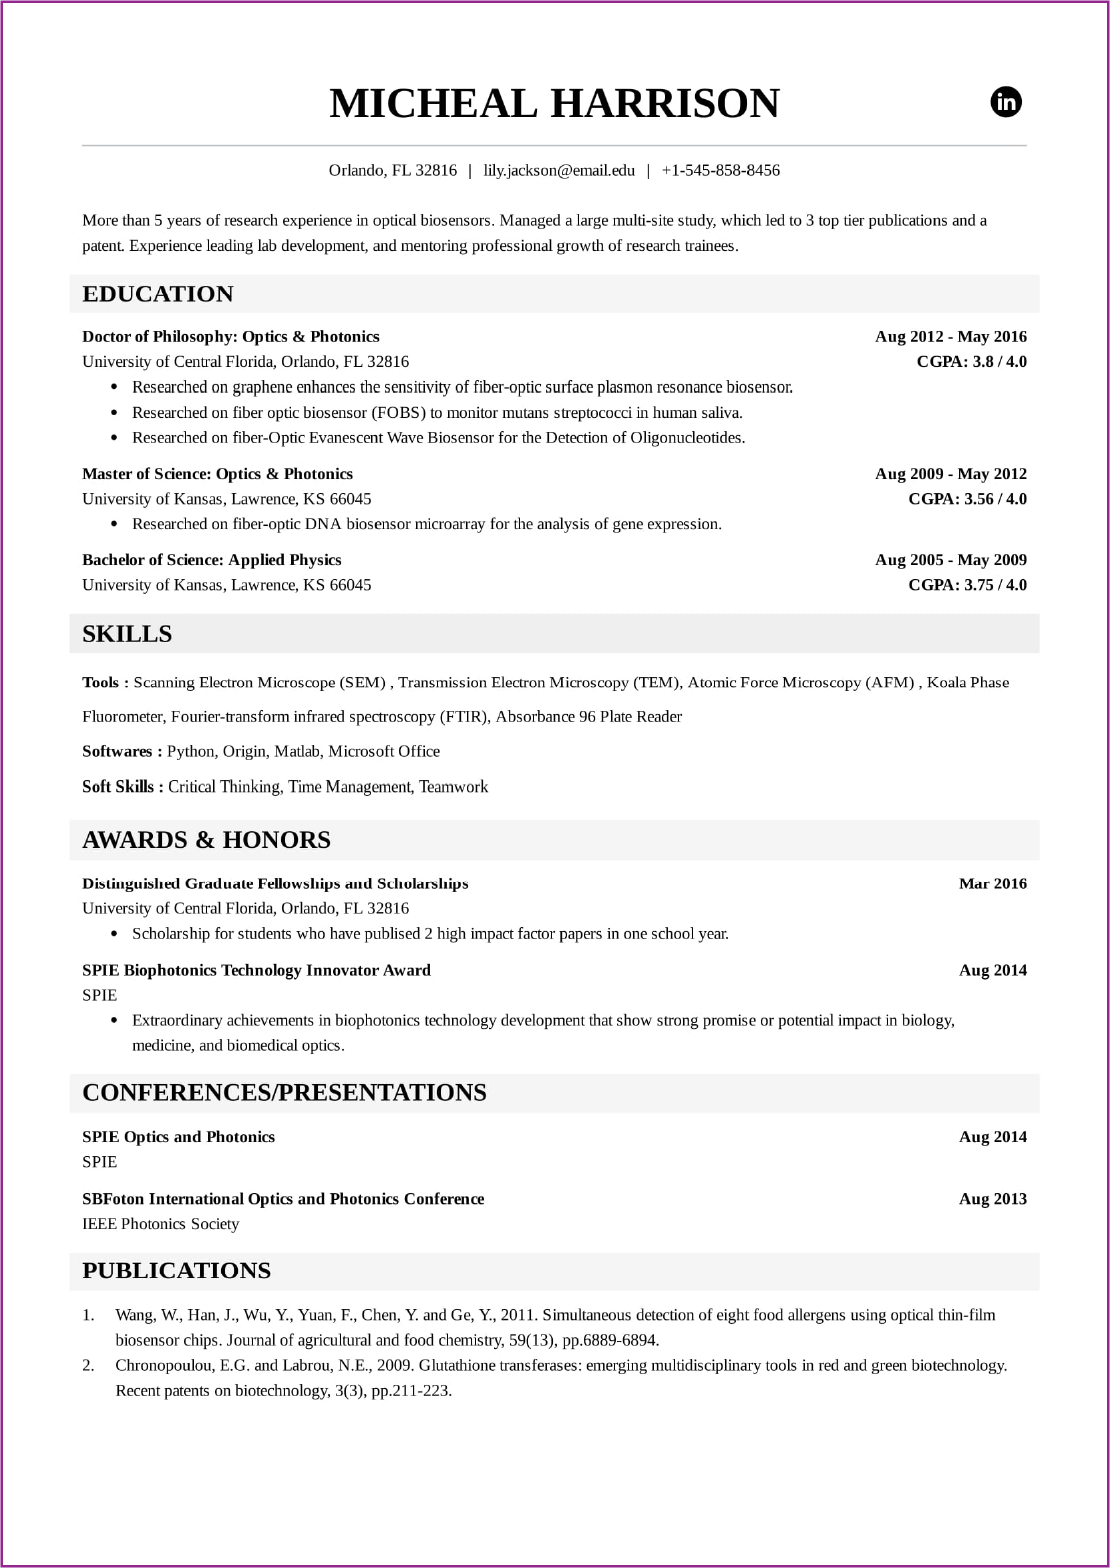 How To Write Awards And Honors Section On A Resume